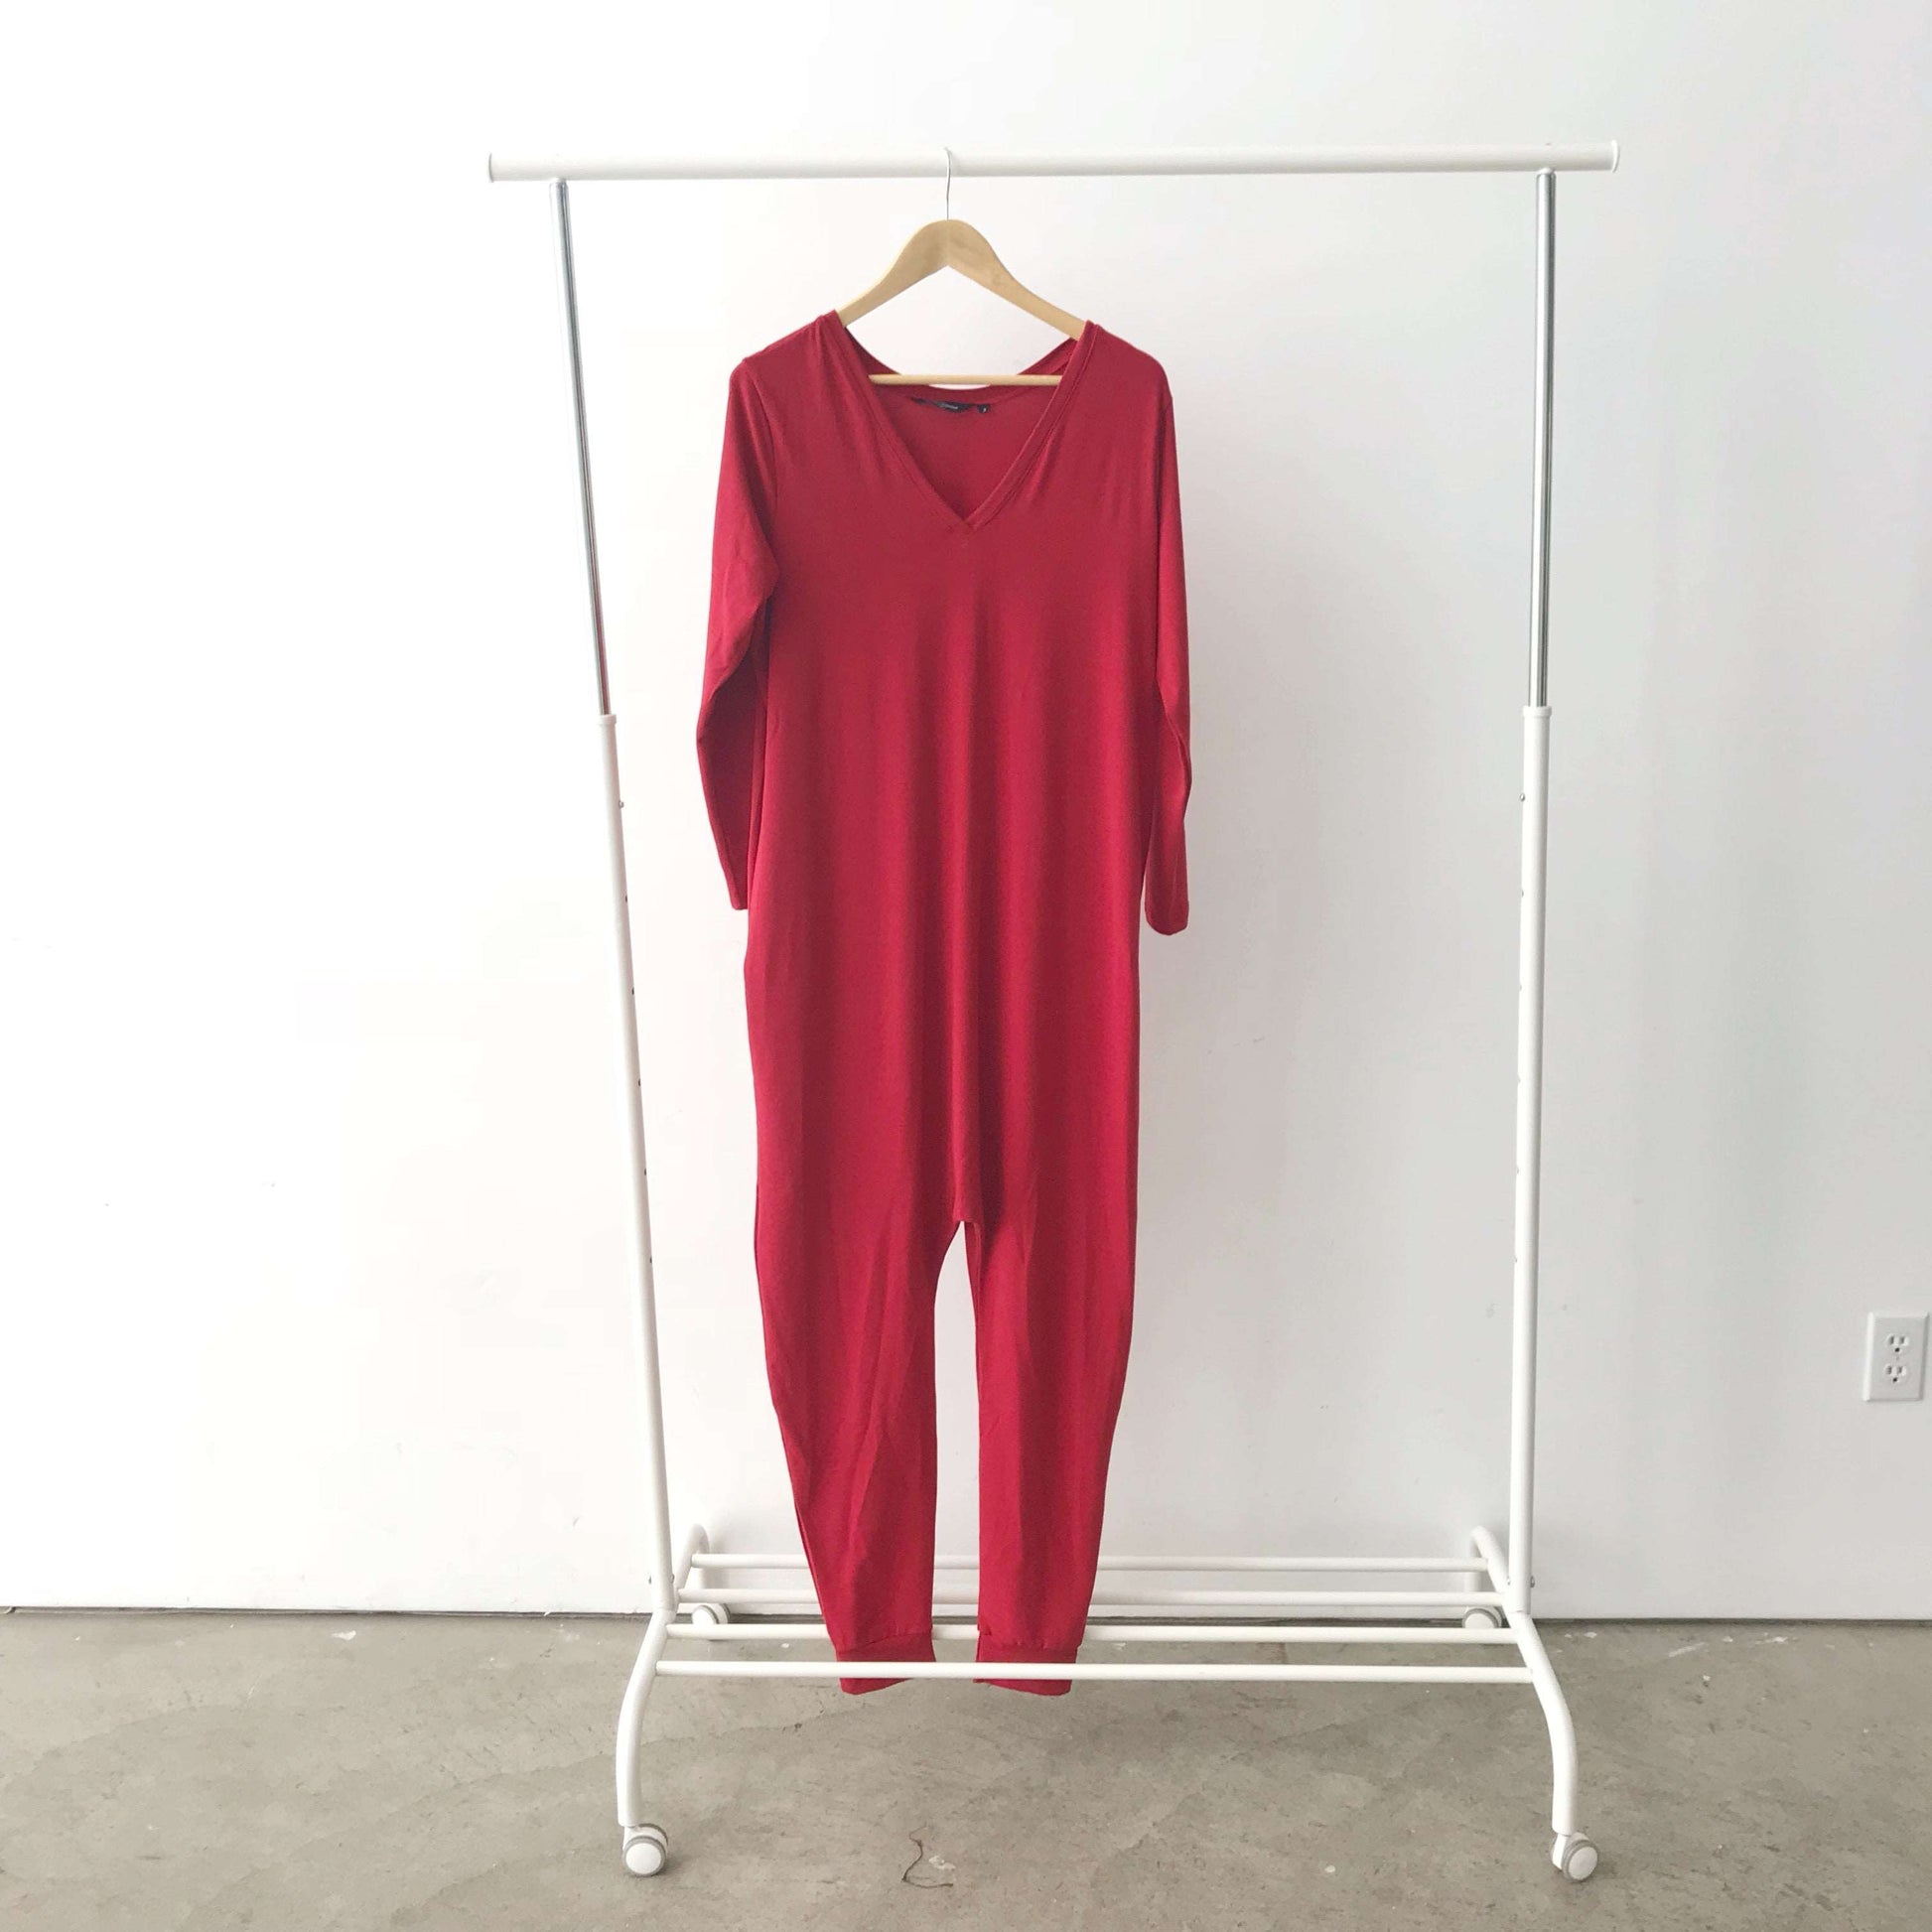 The Long Sleeve Romper in Red